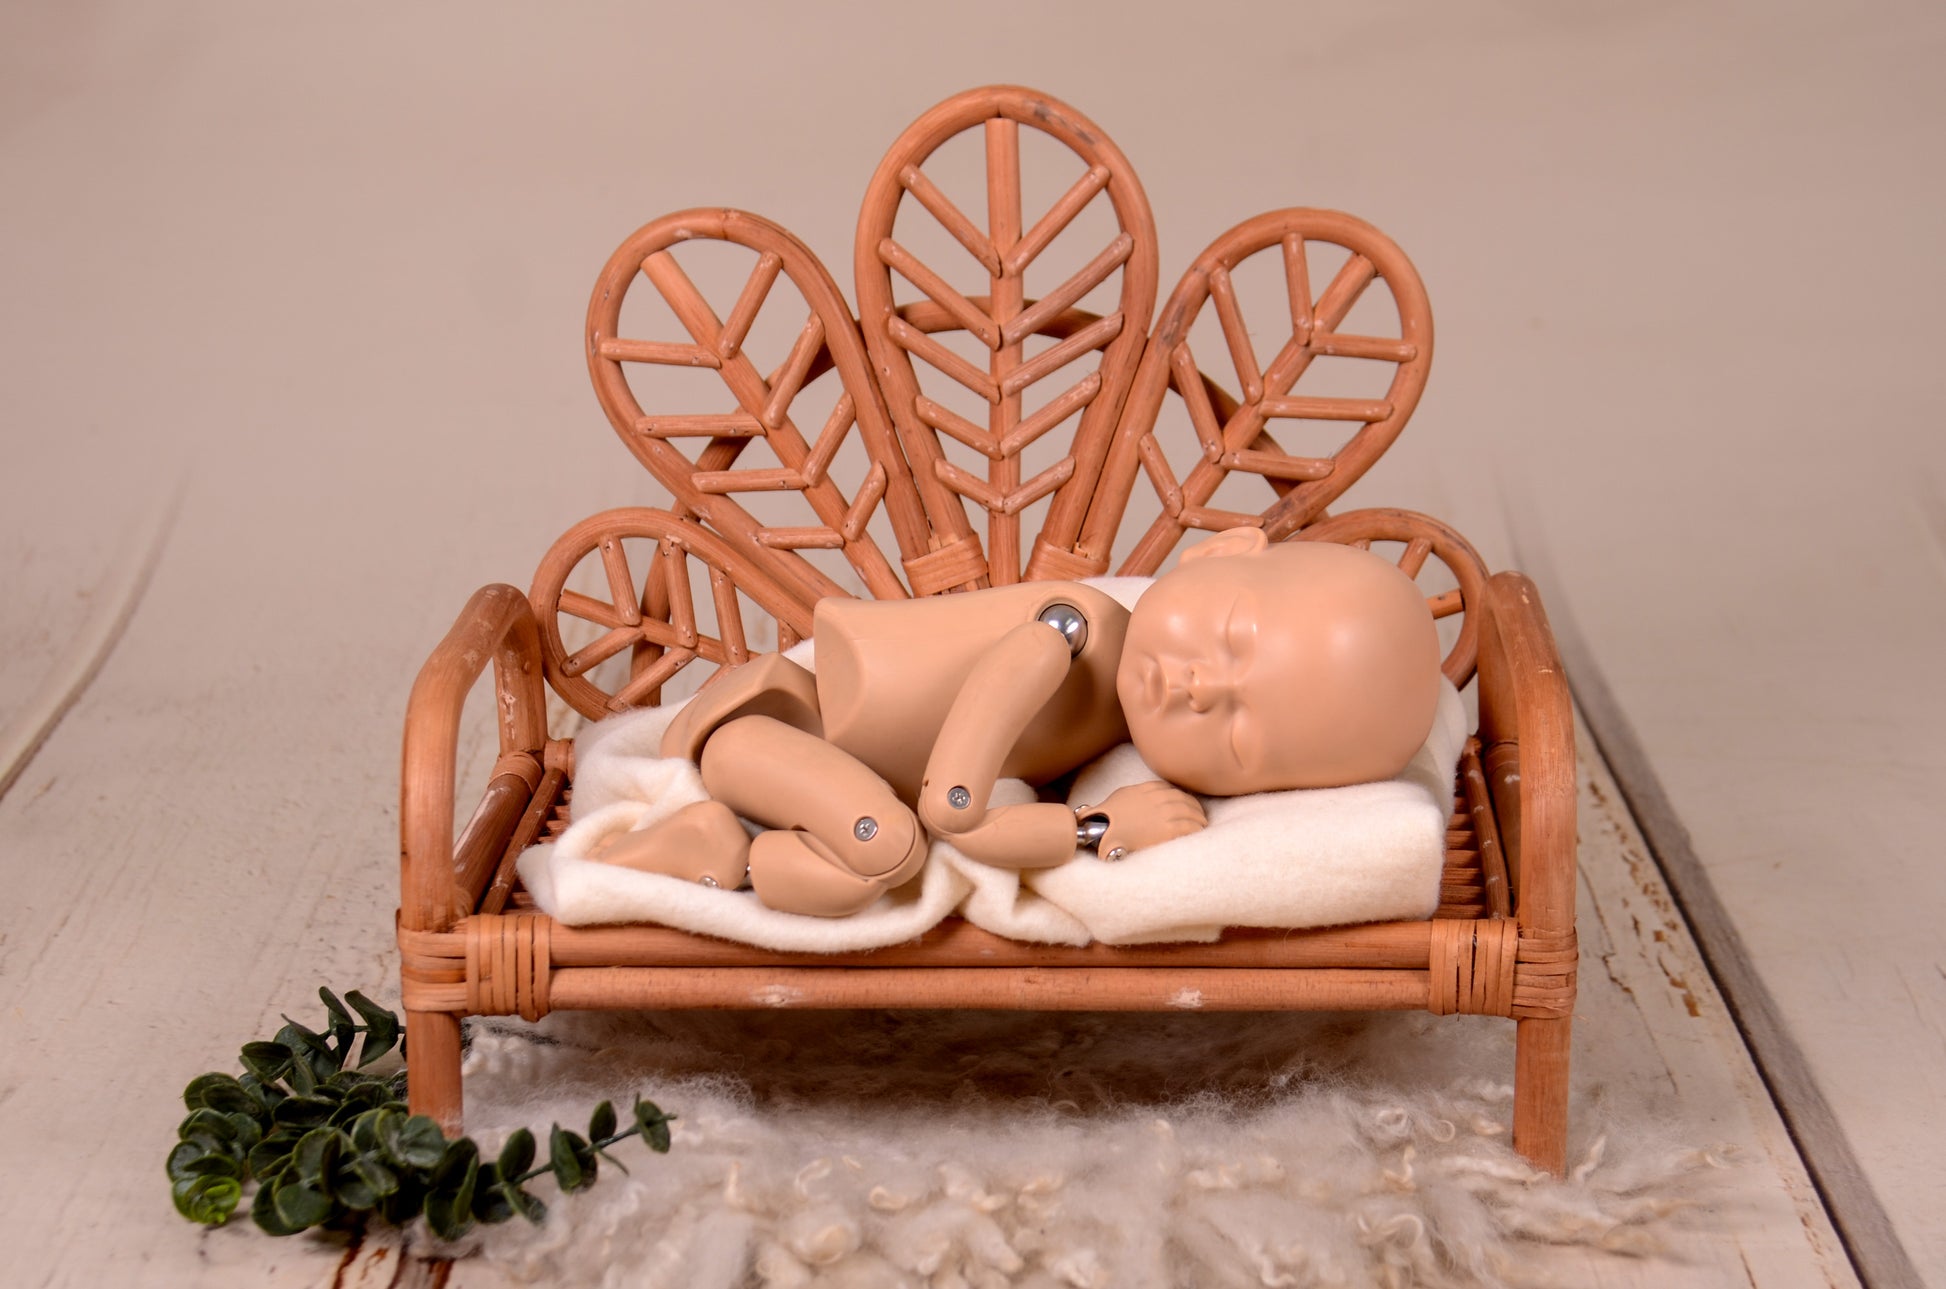 Handcrafted rattan bench with intricately woven leaf-shaped backrest, showcased on a distressed white wooden backdrop with soft faux fur and decorative greenery at the base. Ideal prop for newborn photography sessions, available exclusively at https://newbornstudioprops.com/